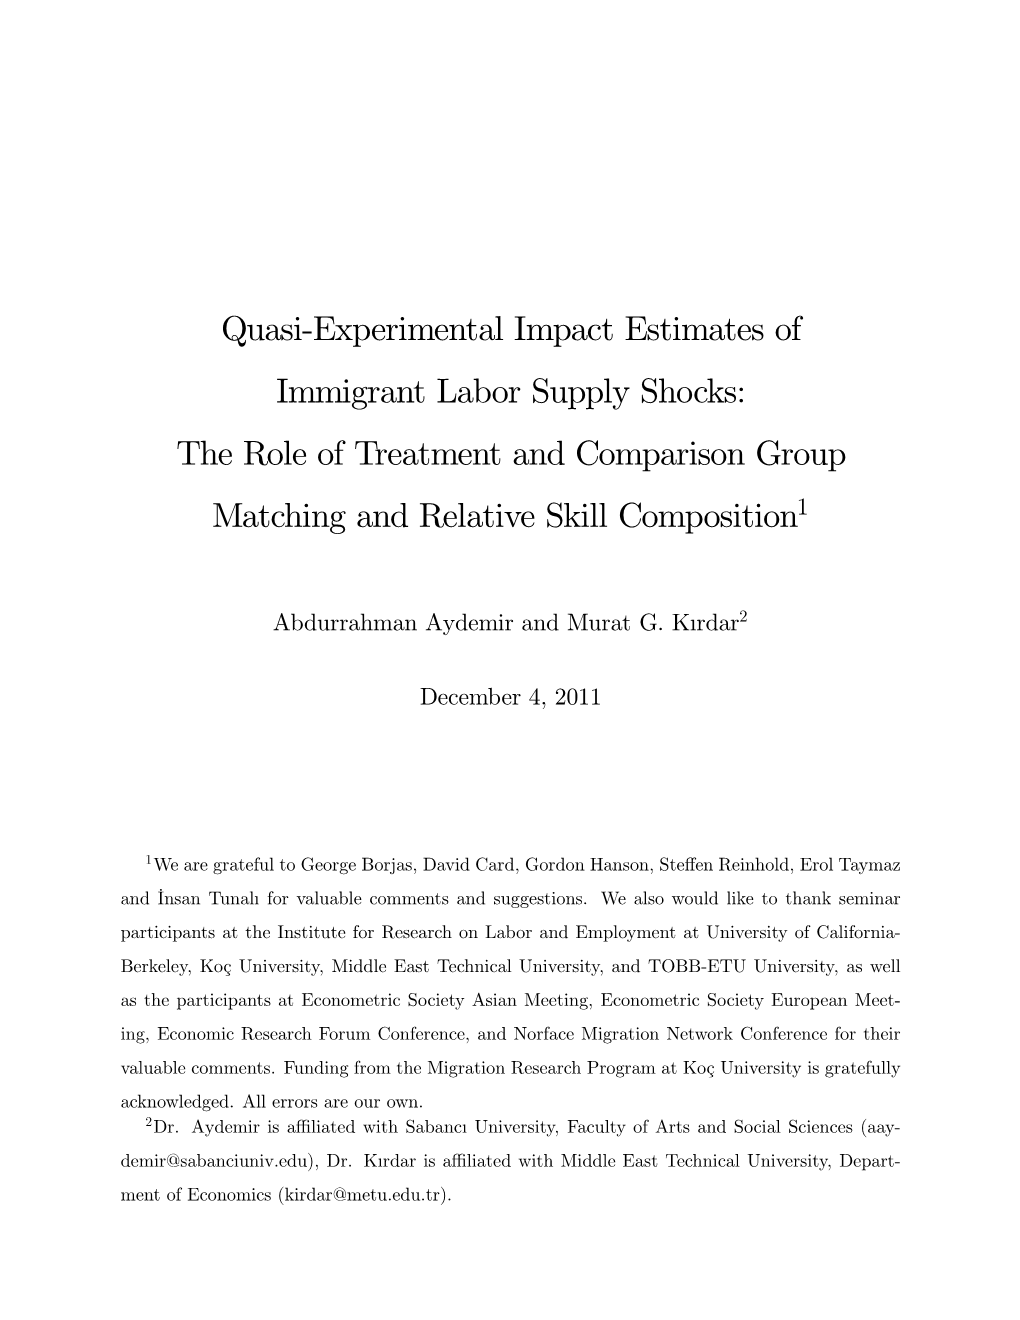 Quasi-Experimental Impact Estimates of Immigrant Labor Supply Shocks: the Role of Treatment and Comparison Group Matching and Relative Skill Composition1